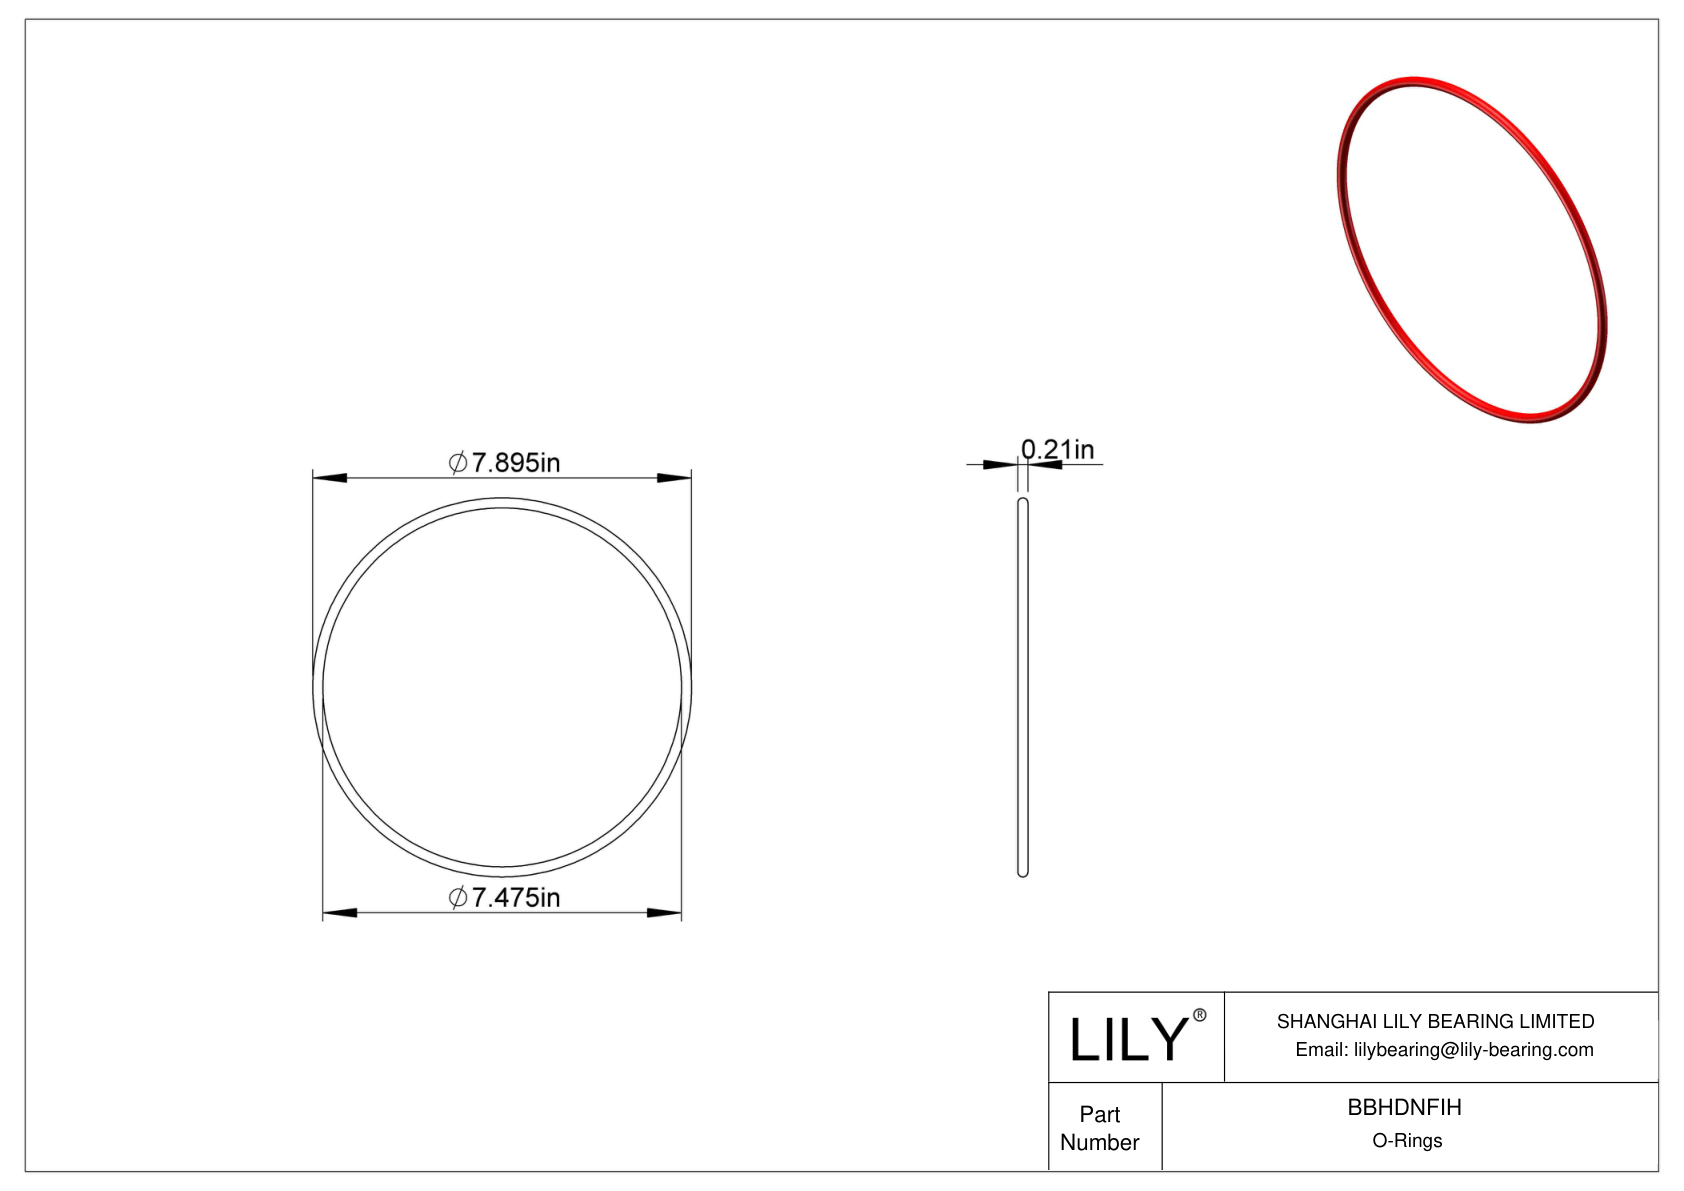 BBHDNFIH High Temperature O-Rings Round cad drawing